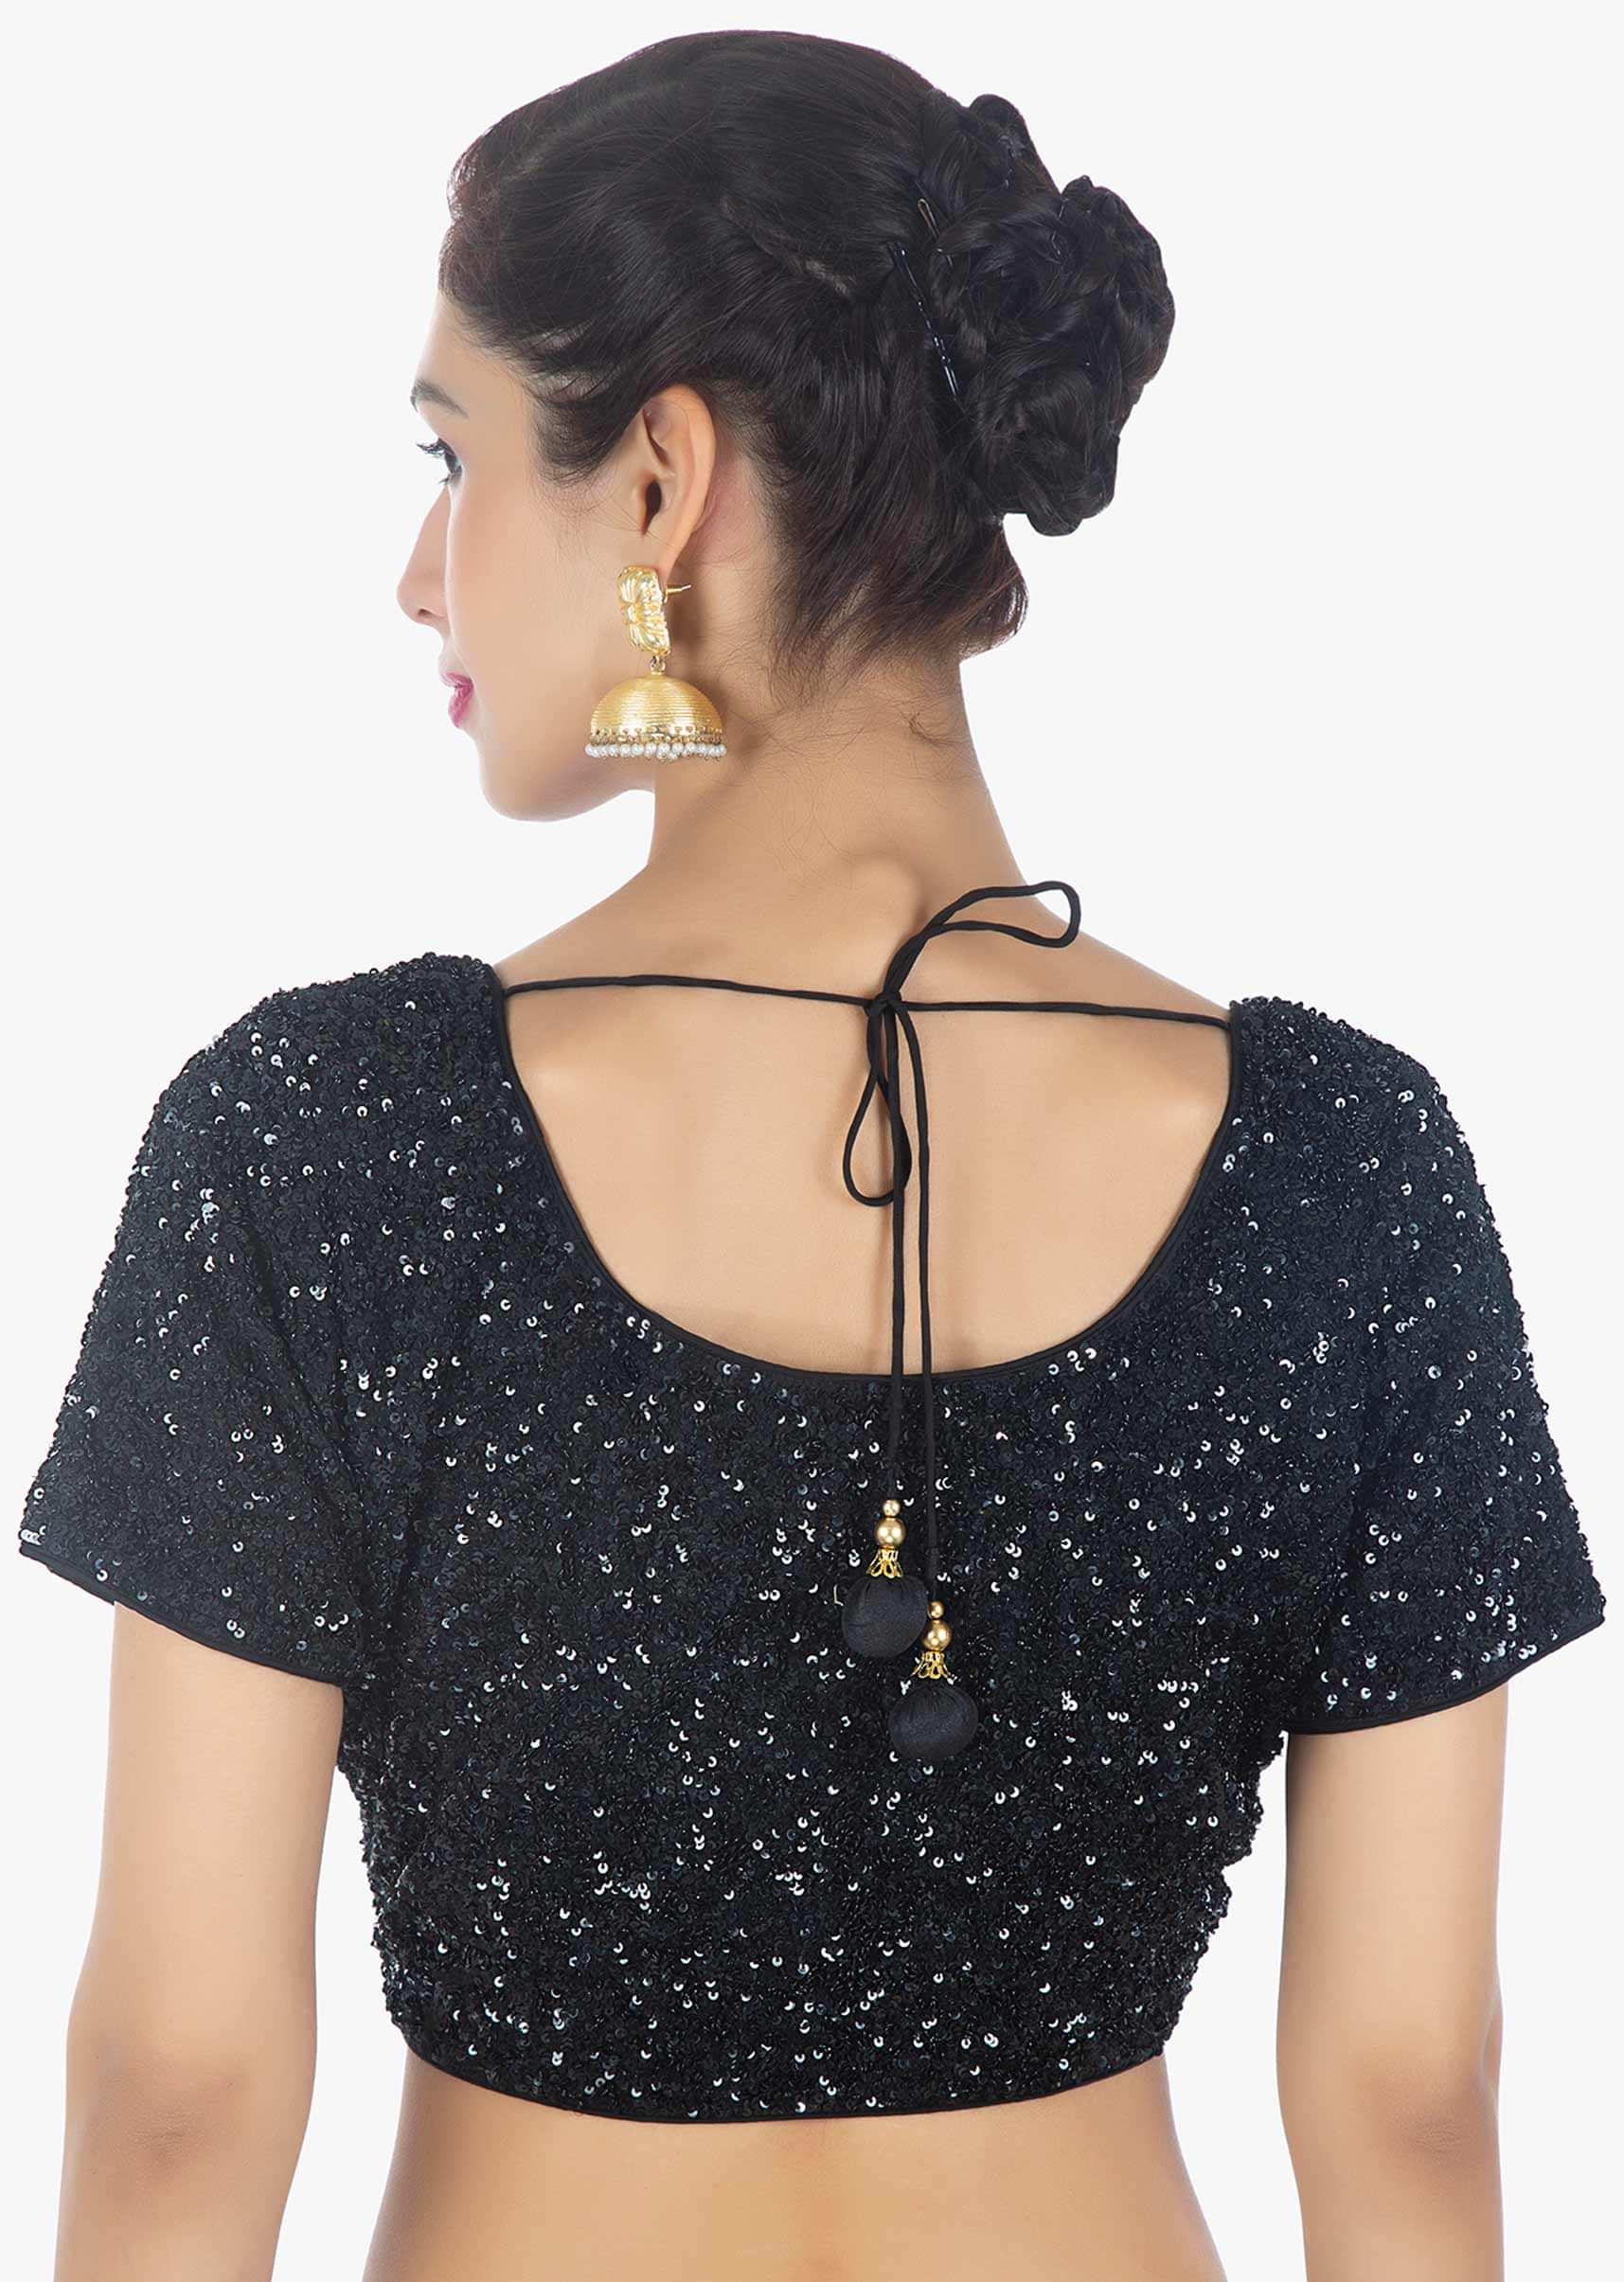 Black net thread embroidered saree paired with a shimmery sequins blouse